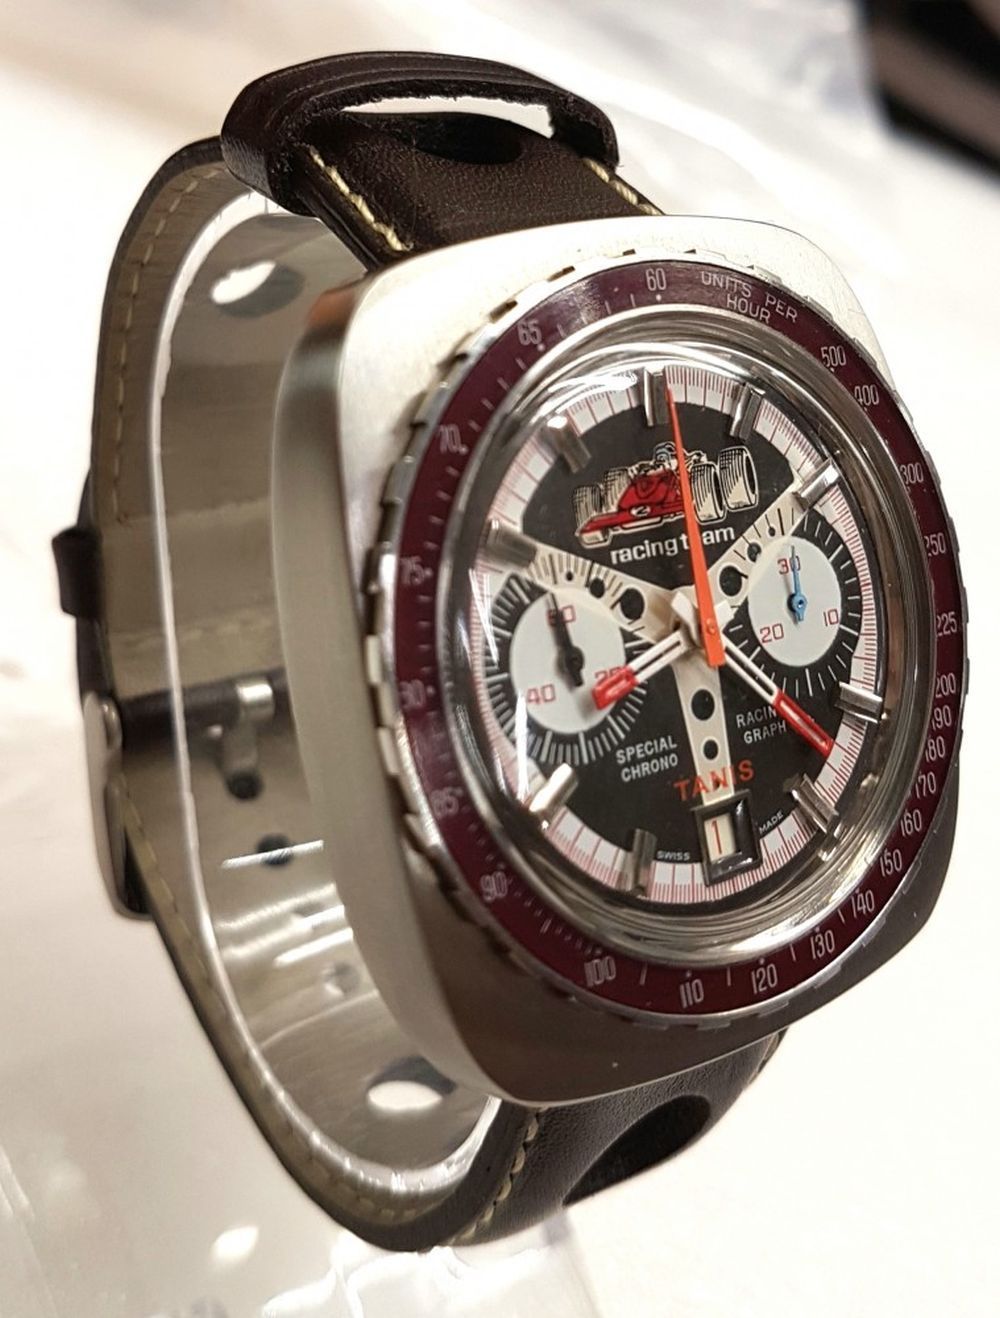 TANIS NOS SPECIAL RACING TEAM CHRONOGRAPH WITH BAKELITE BEZEL 1970S. VALJOUX CAL. 7734, square, - Image 2 of 8